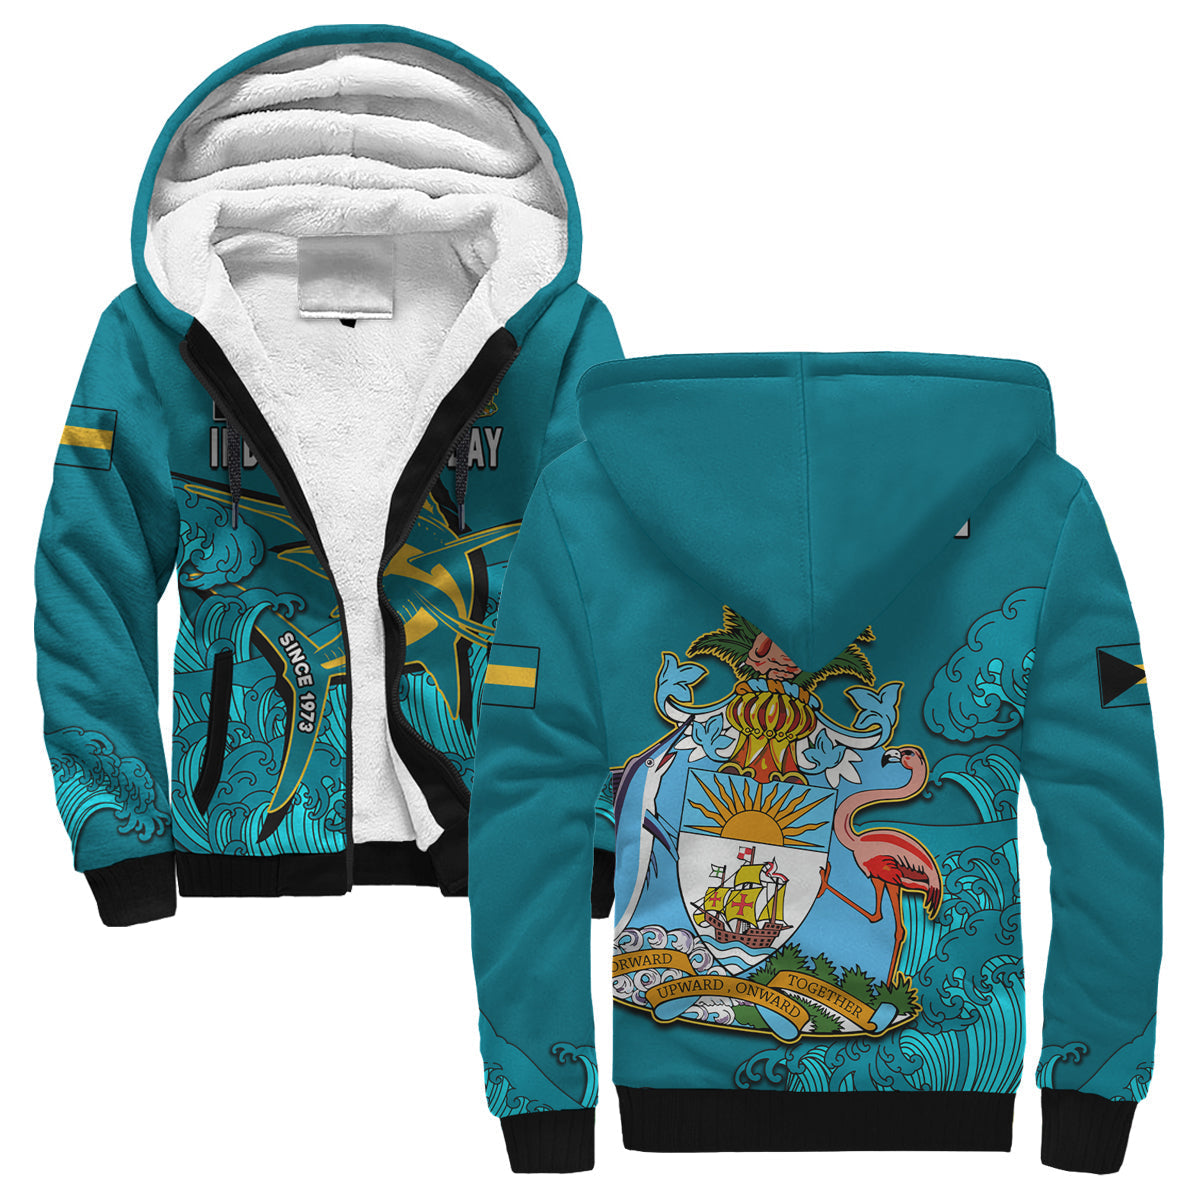 custom-personalised-bahamas-independence-day-sherpa-hoodie-blue-marlin-since-1973-style